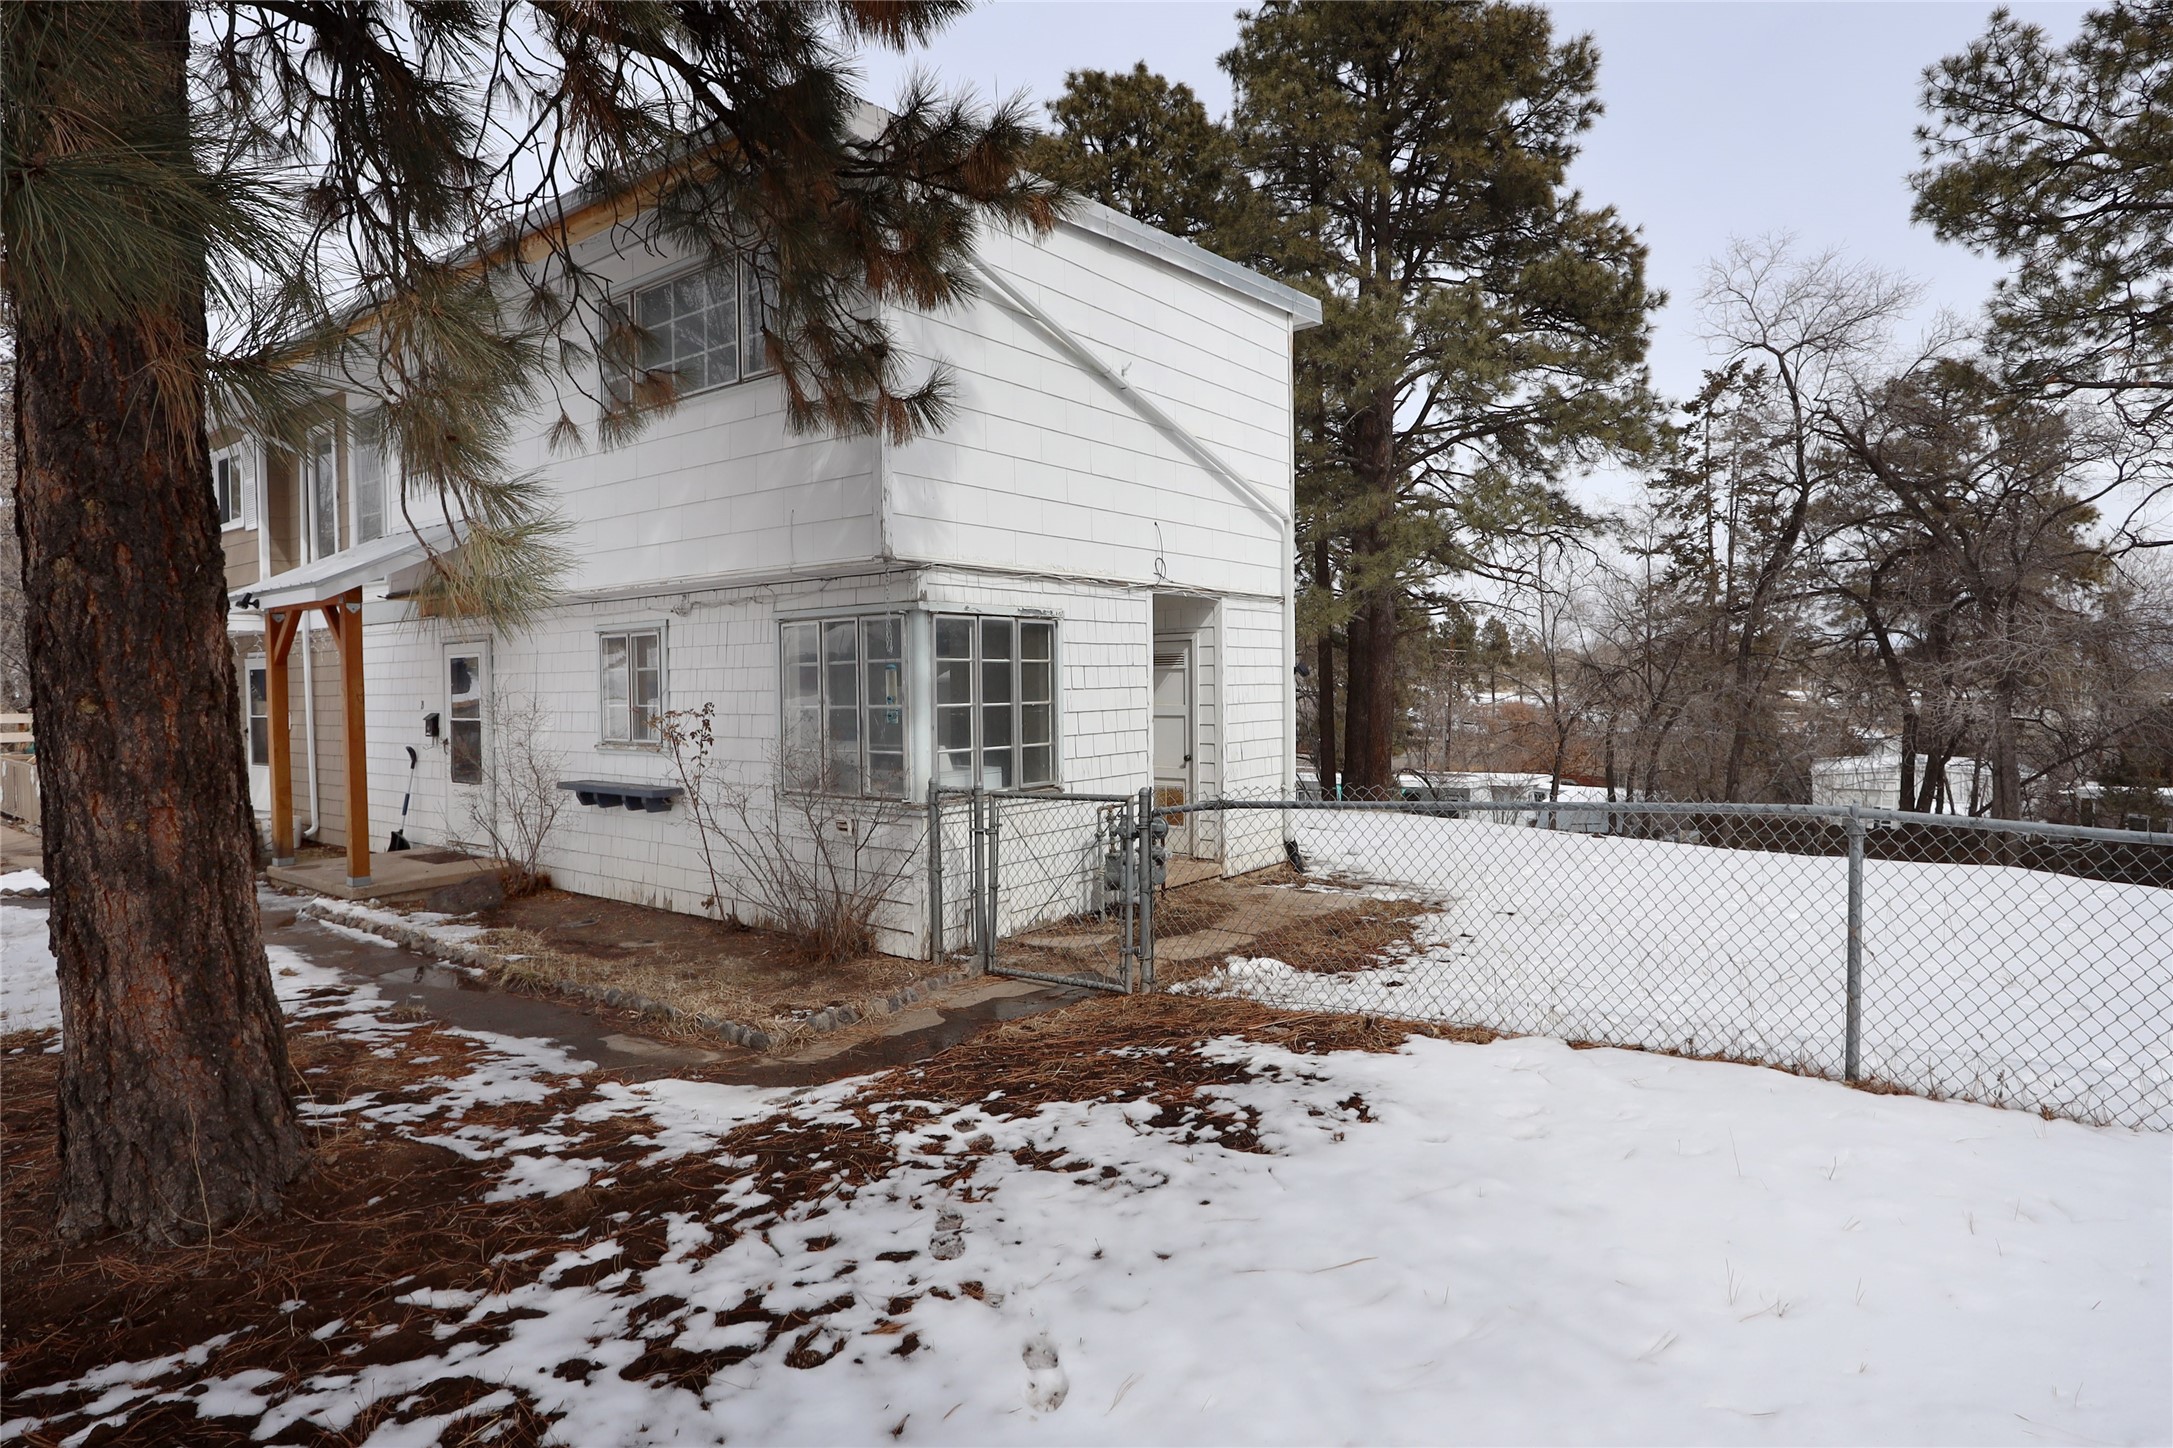 2374 36th B, Los Alamos, New Mexico 87544, 3 Bedrooms Bedrooms, ,1 BathroomBathrooms,Residential,For Sale,2374 36th B,202334875